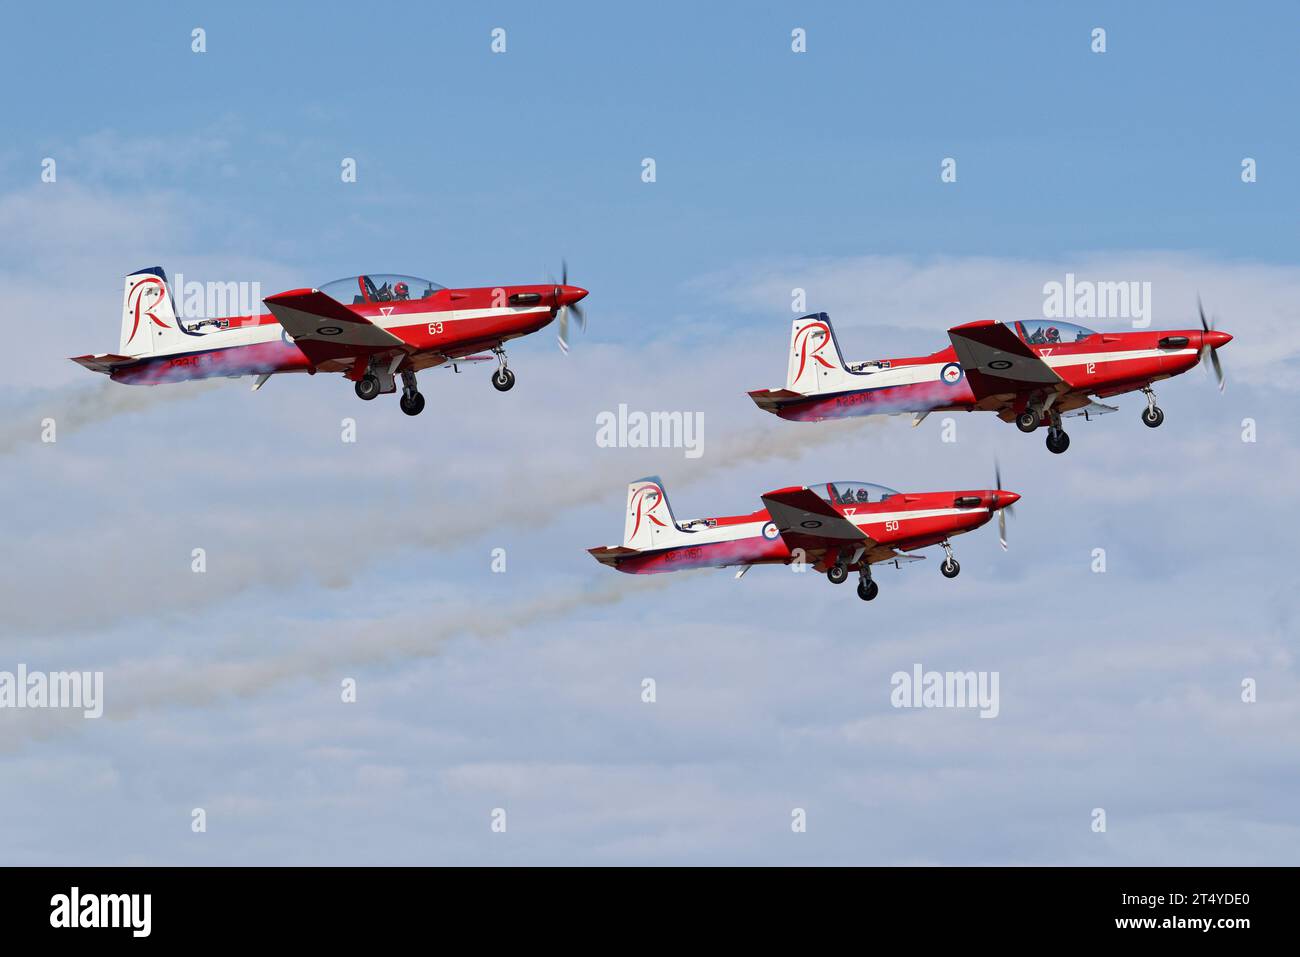 Royal Australian Air Force (RAAF) Pilatus PC-9 roulettes seen flying in formation at Avalon Airshow 2019. Stock Photo